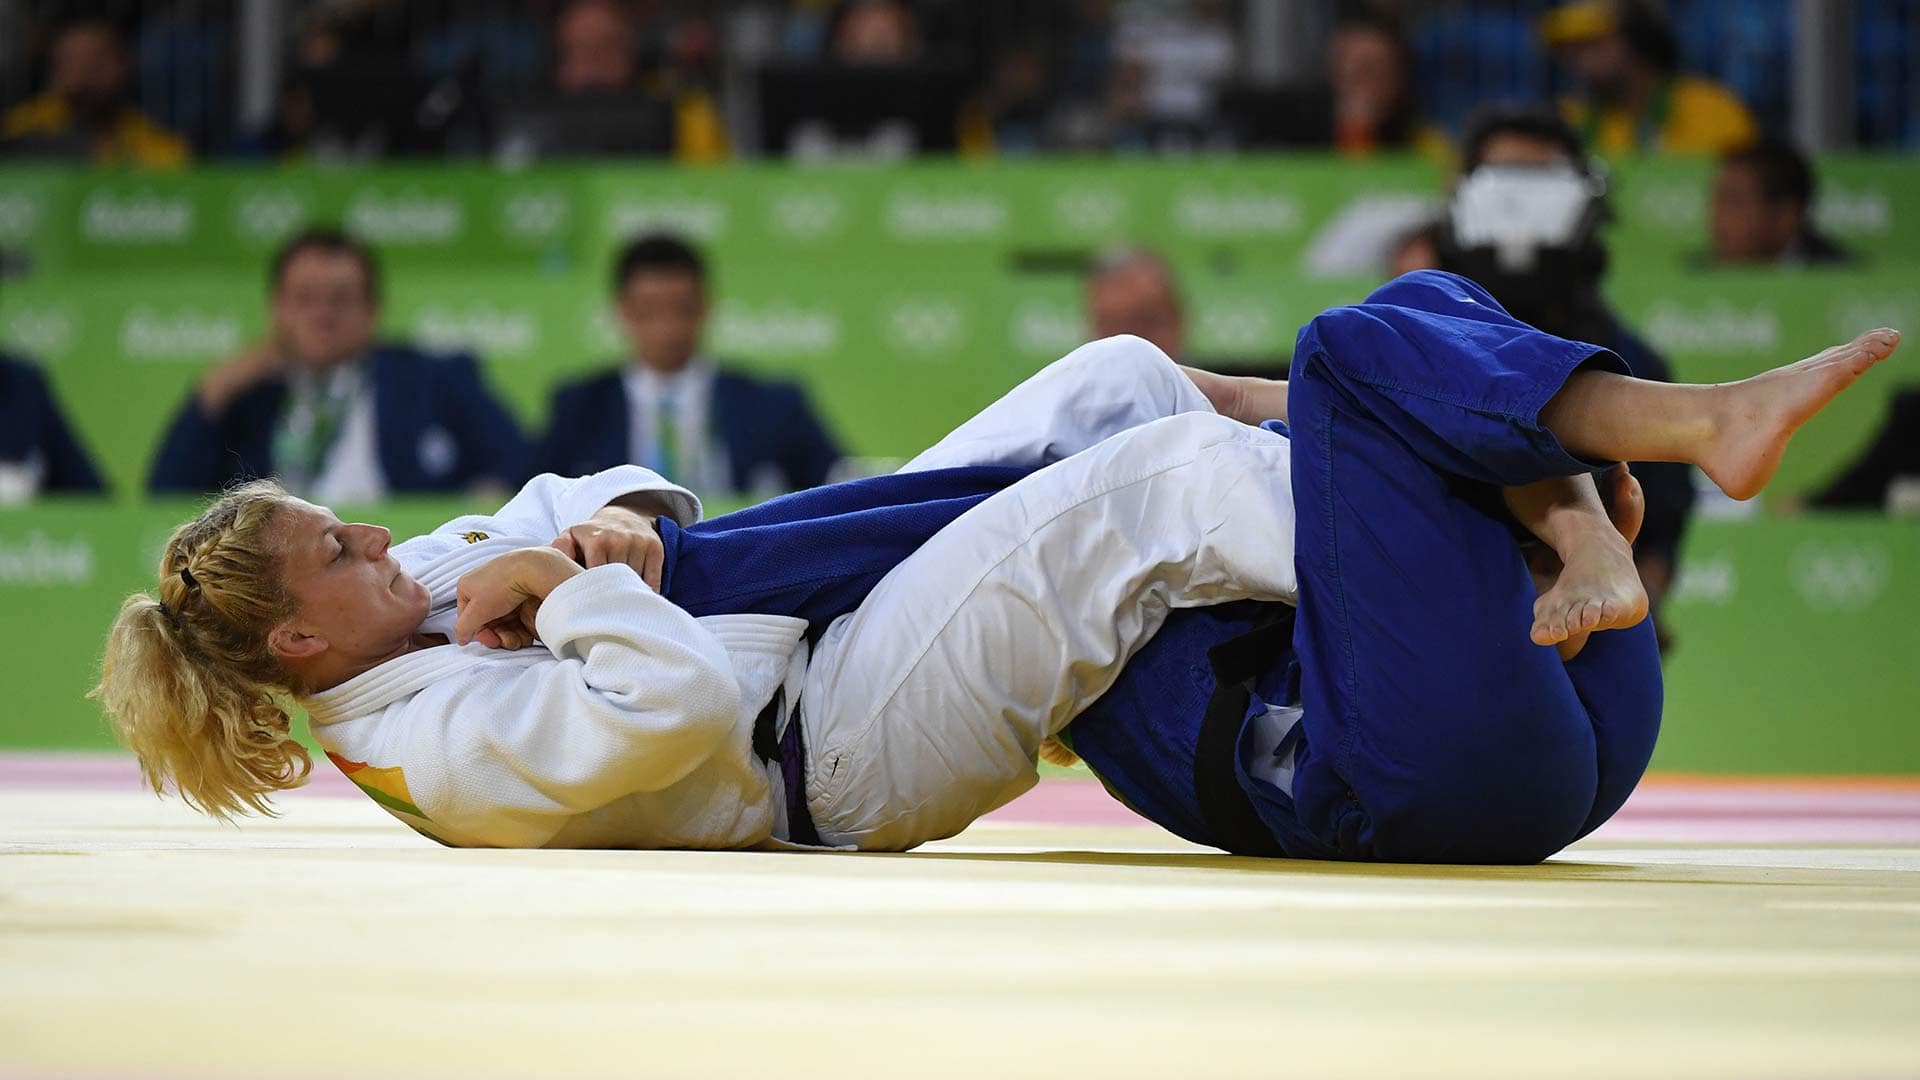 Kayla Harrison clinches Olympic medal with armbar submission. NBC